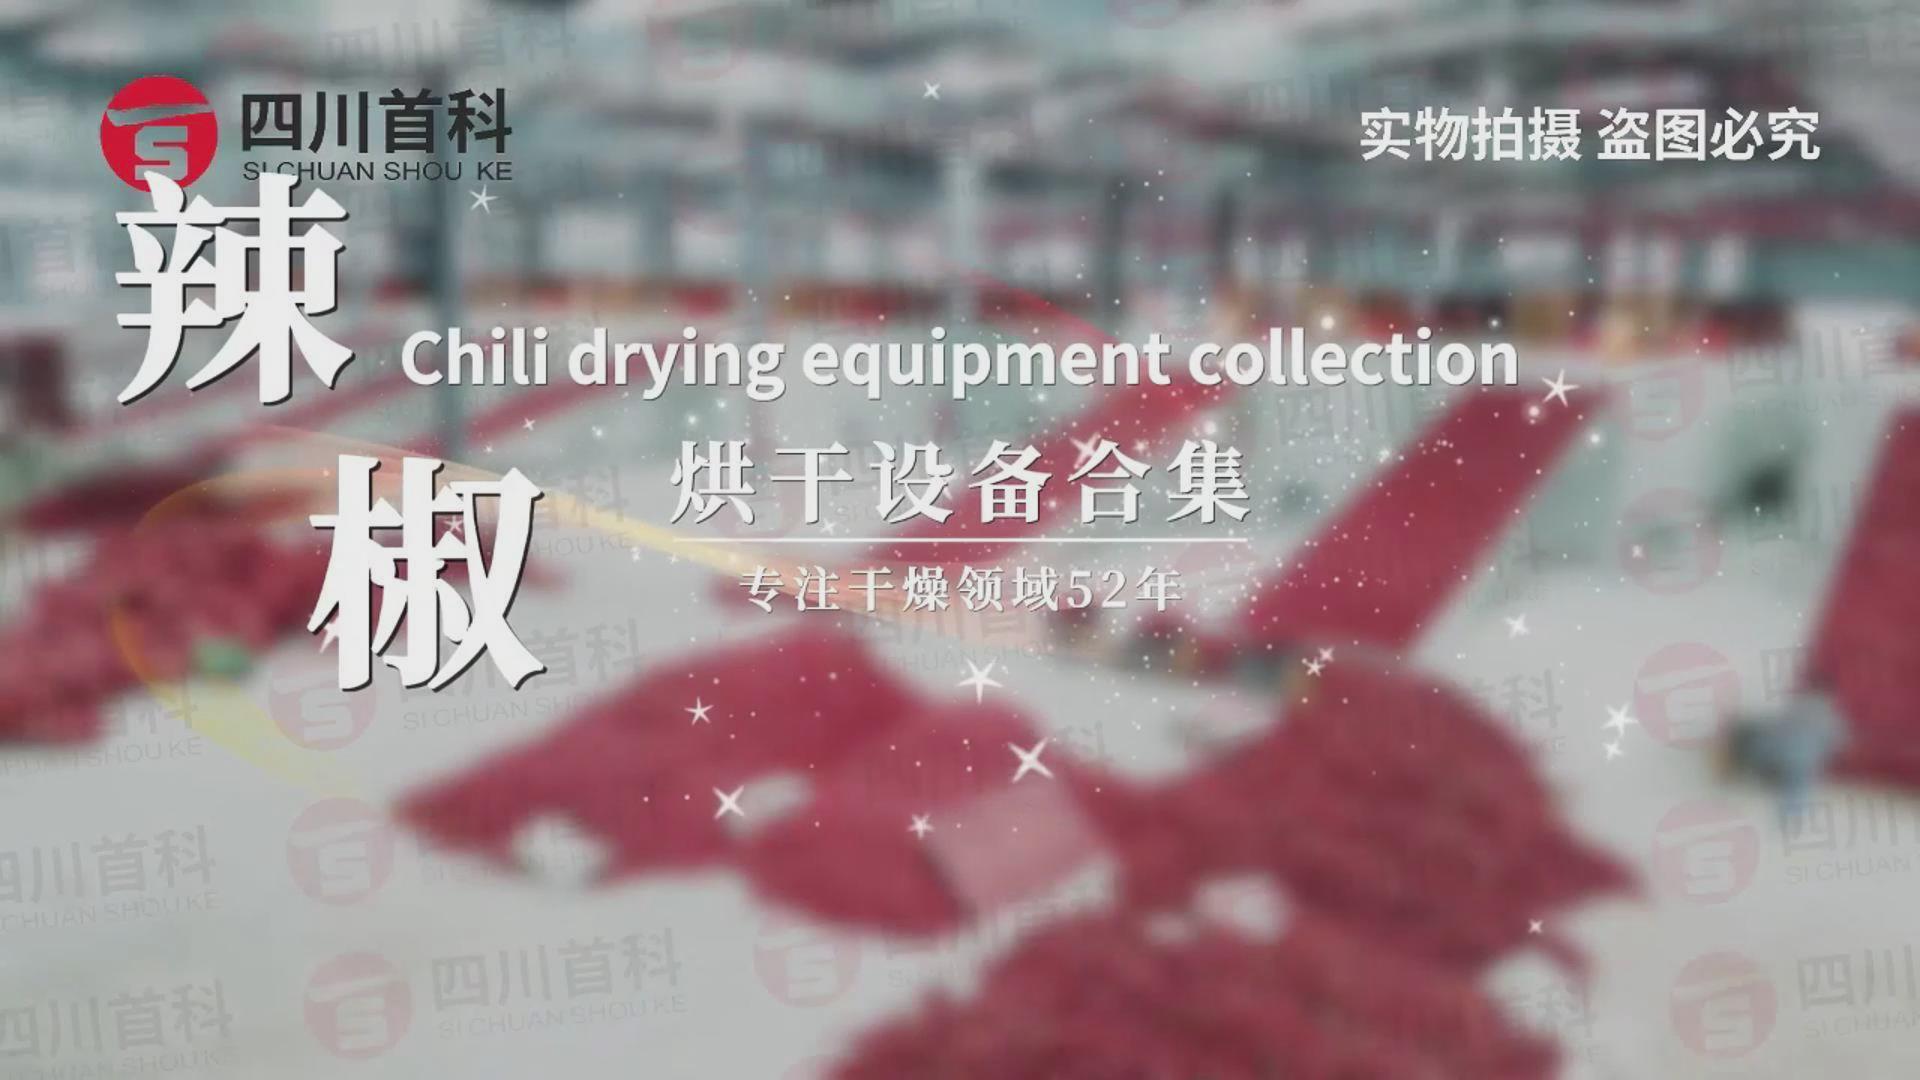 A collection of multiple chili drying projects from Shouchuang Technology